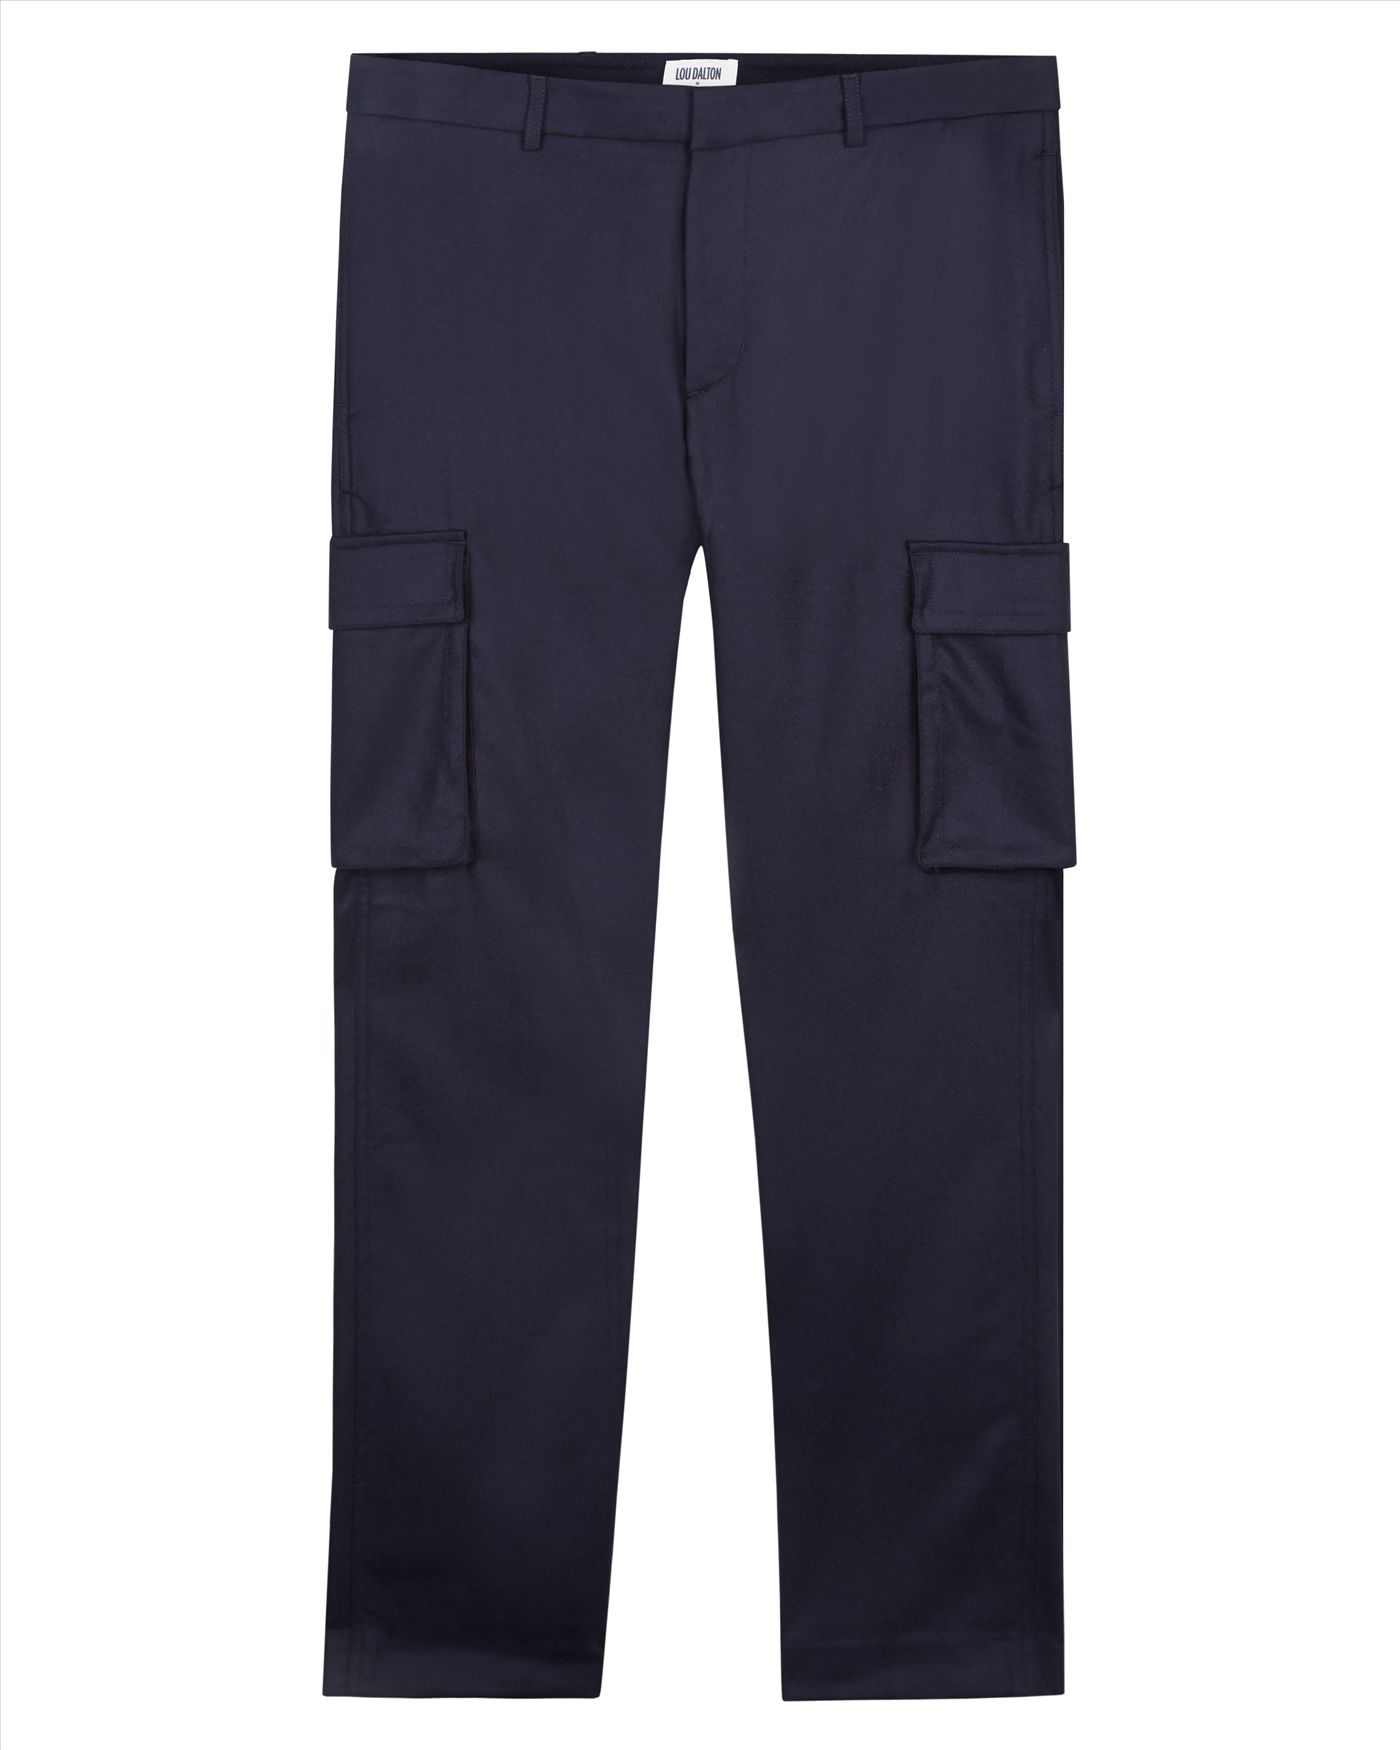 Lyst - Jaeger Lou Dalton Cargo Trousers in Blue for Men - Save 63%